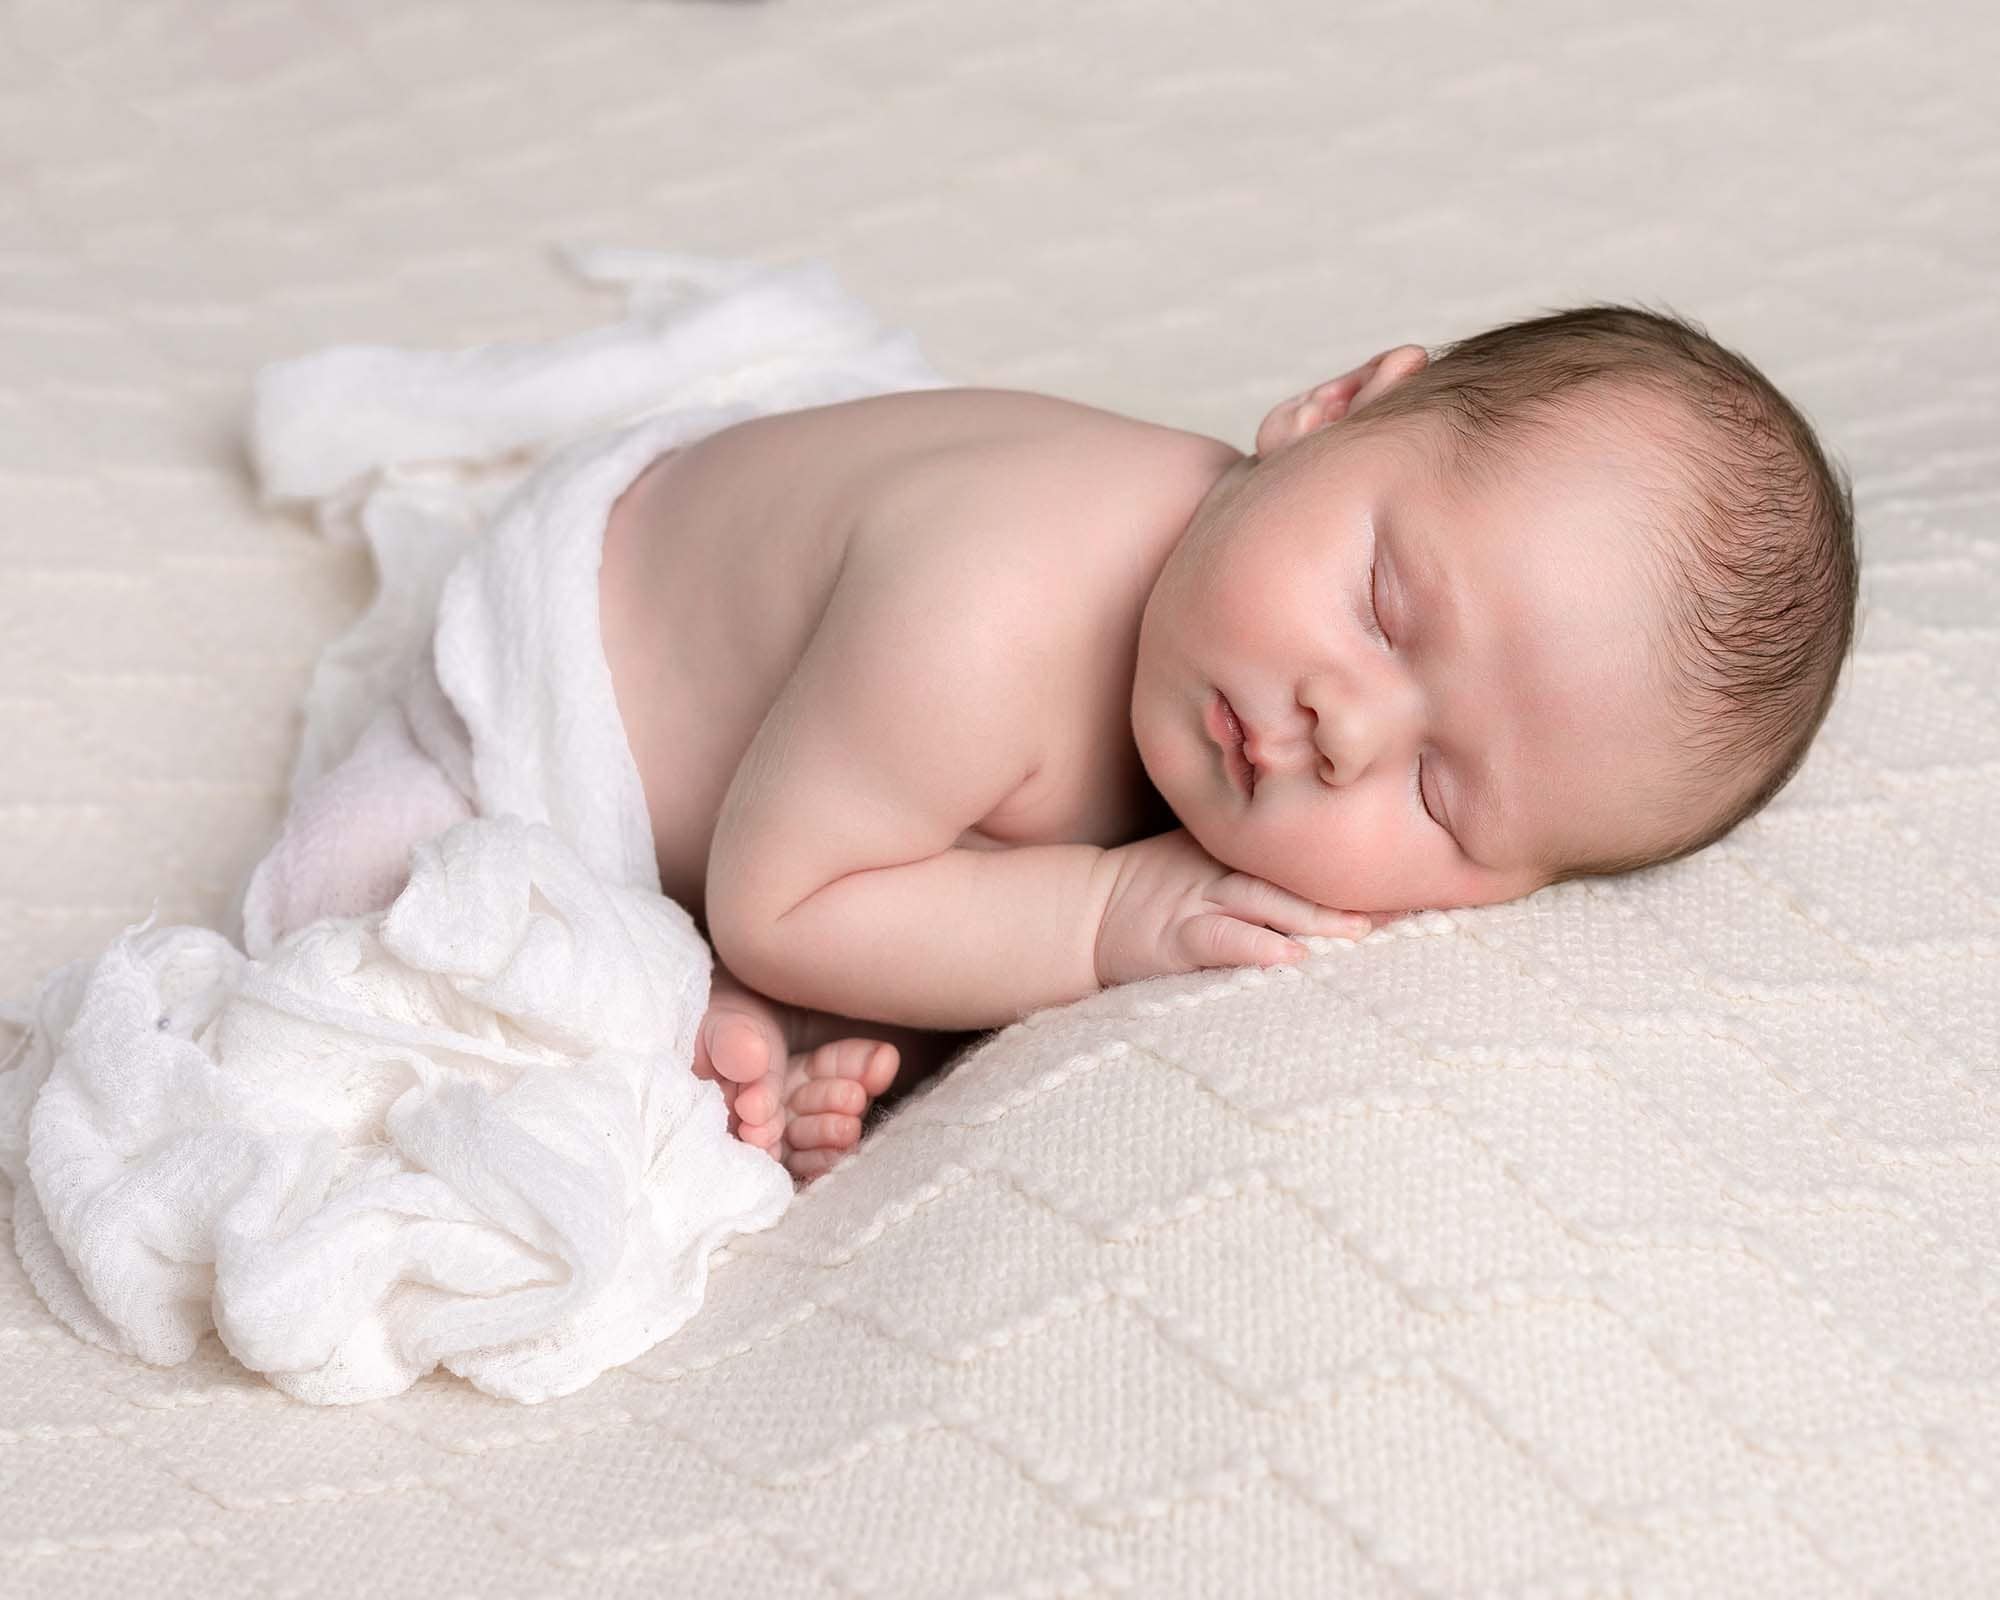 Baby boy on cream embossed blanket lay on tummy with white fabric covering him, Image taken durin baby photoshoot in Glasgow